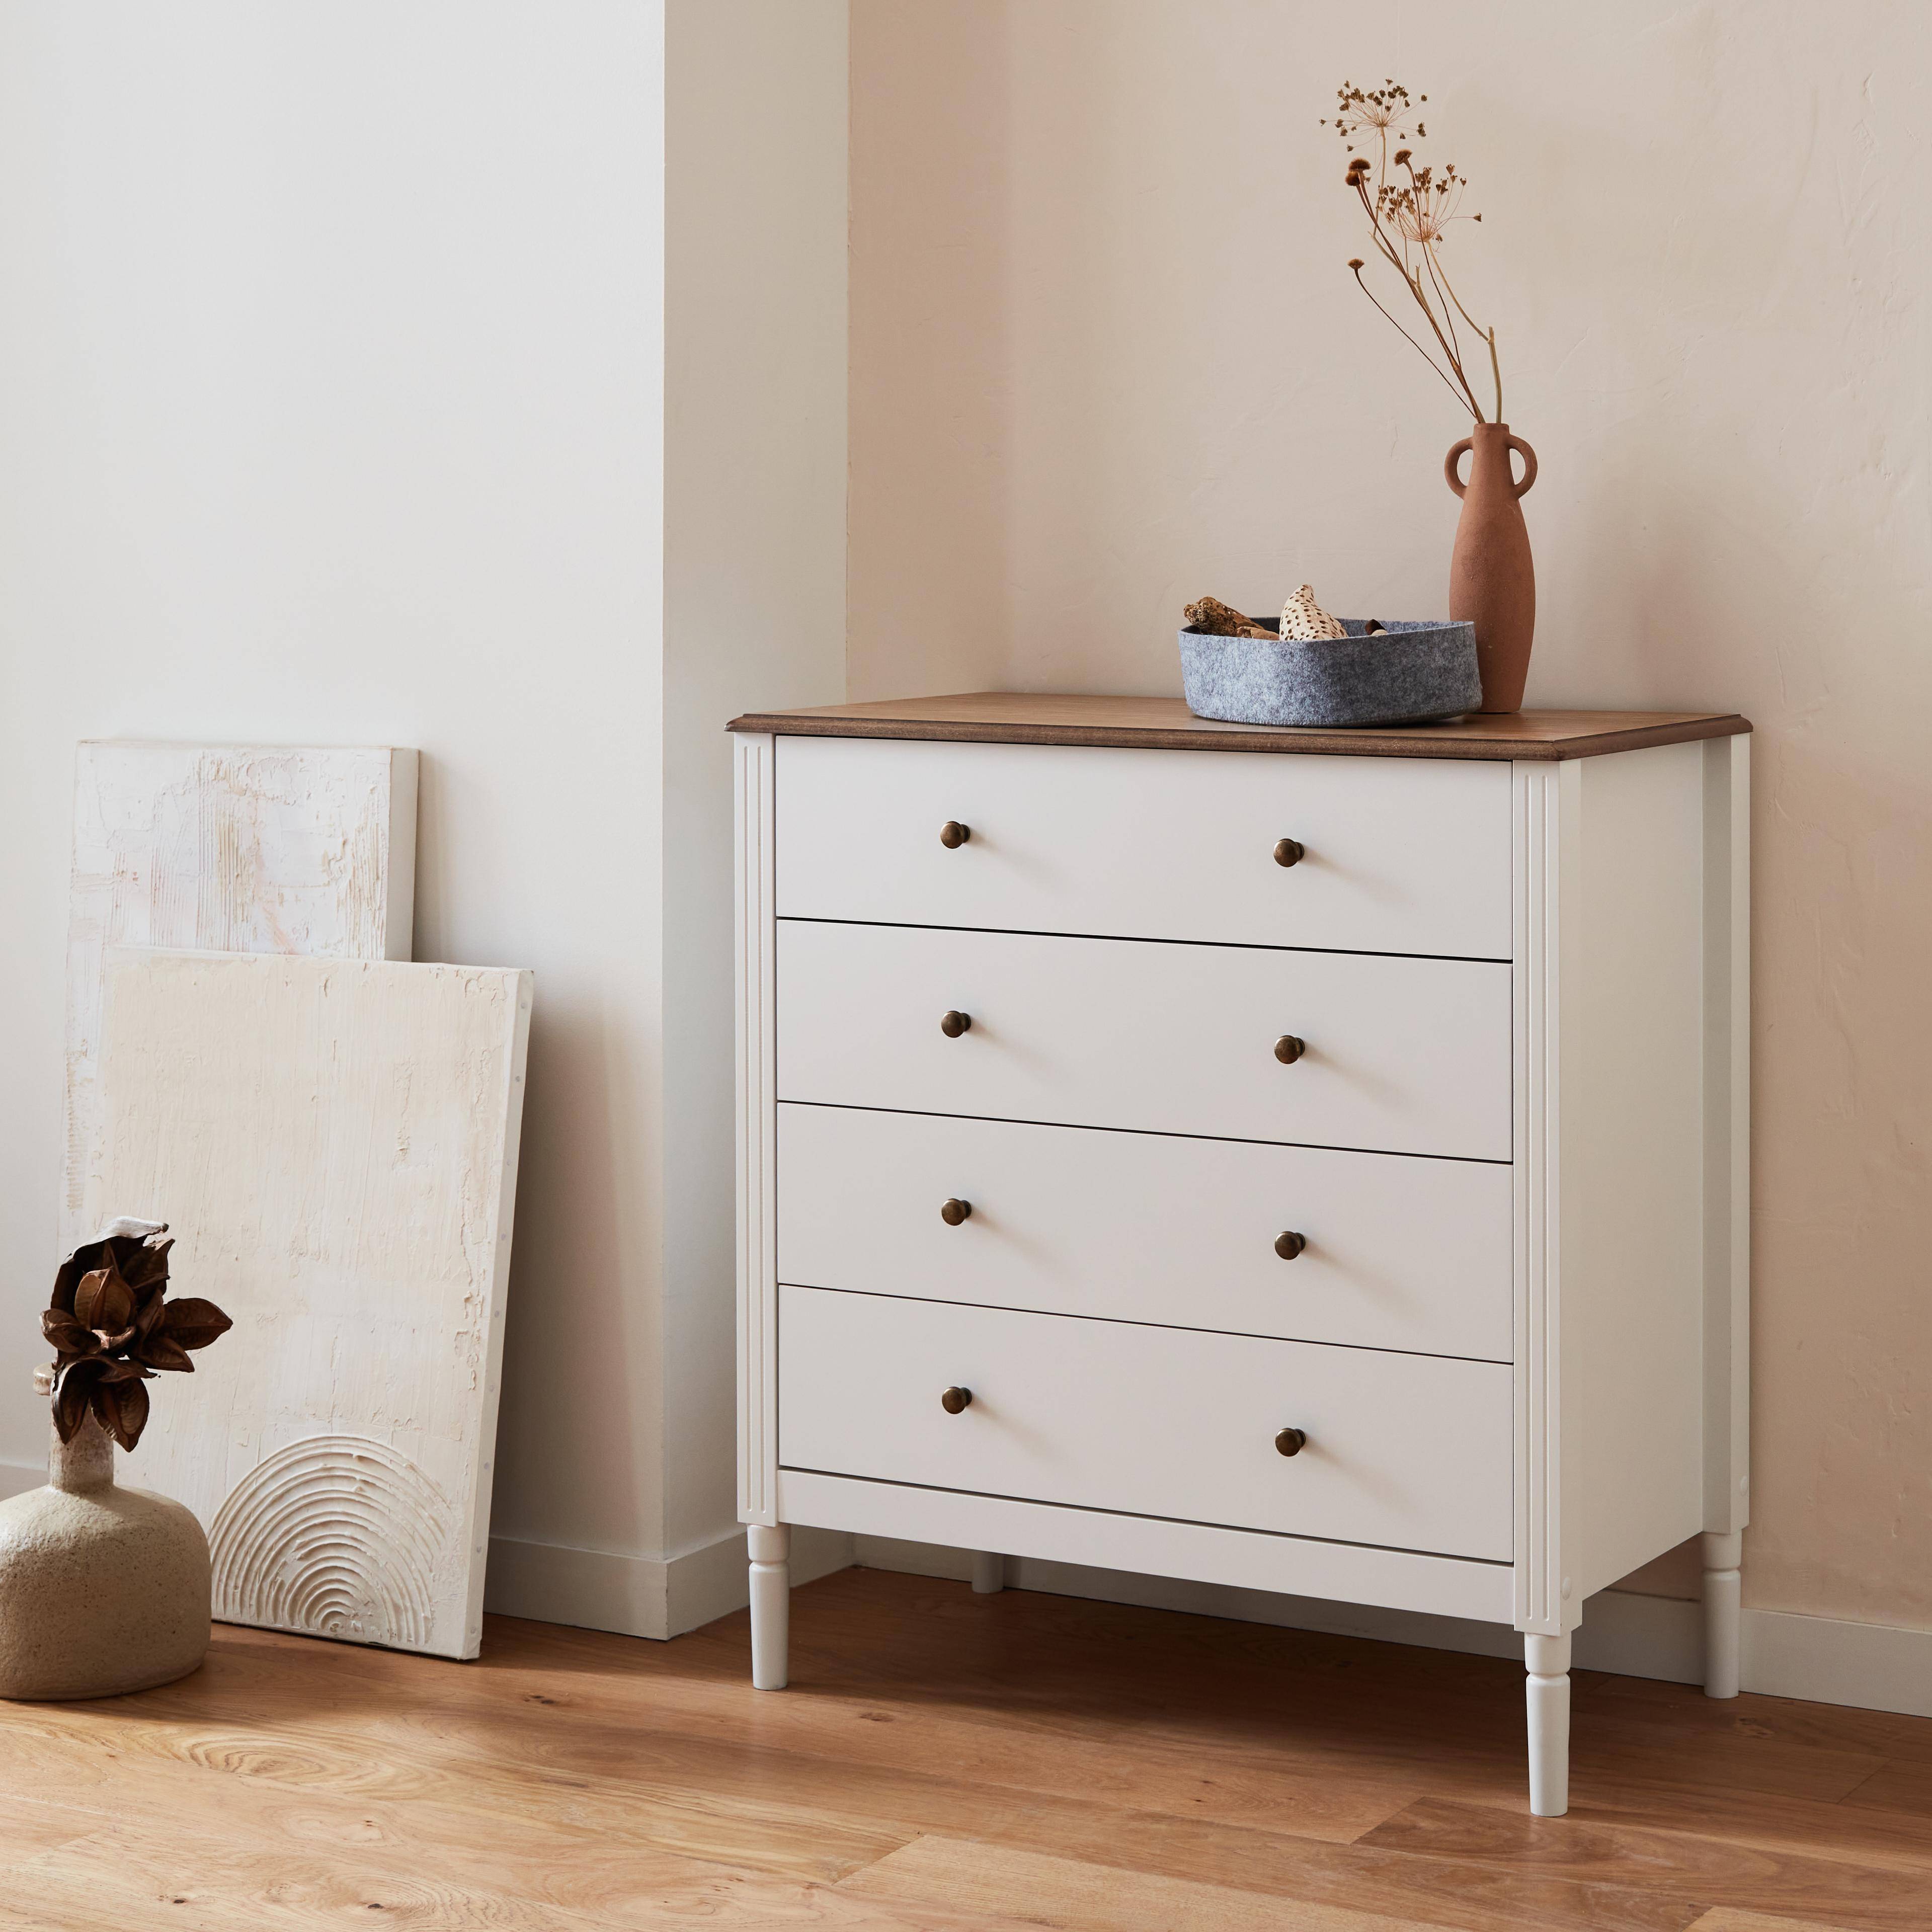 4-drawer chest with pinewood legs, 80x40x85cm, Celeste, White Photo2